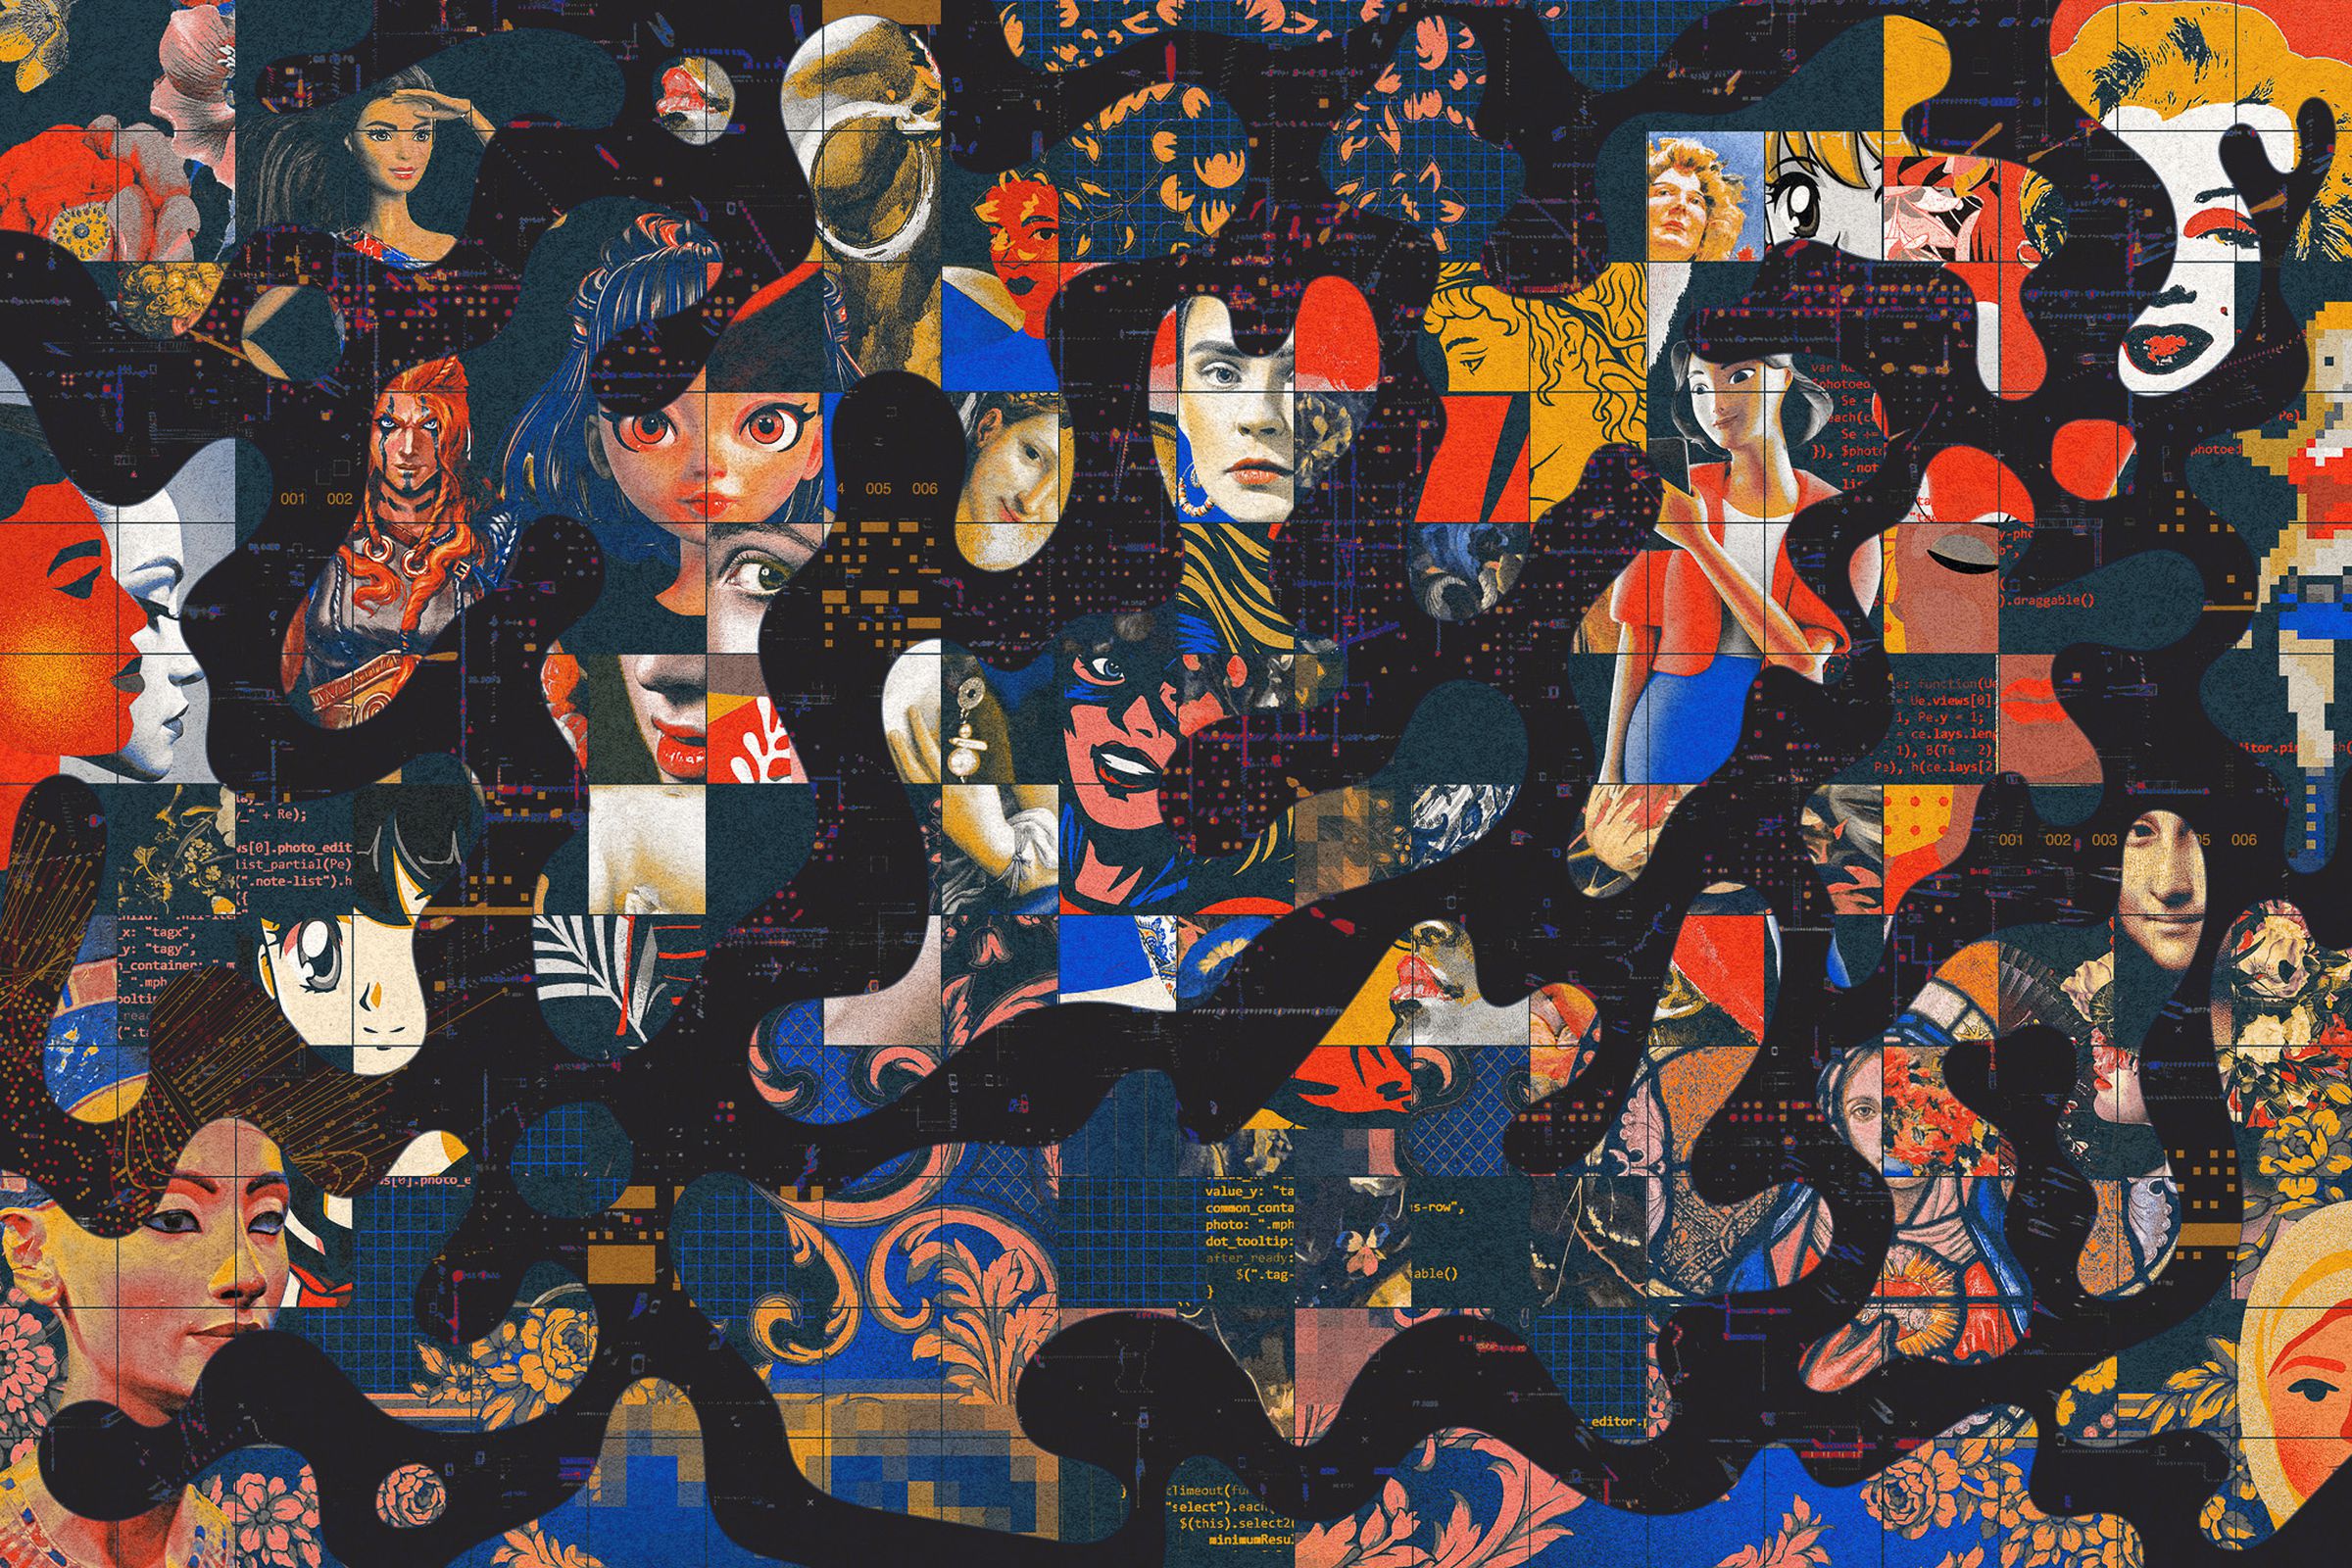 A collage comprised of faces, each in a unique art style over a dark background with abstract digital elements.